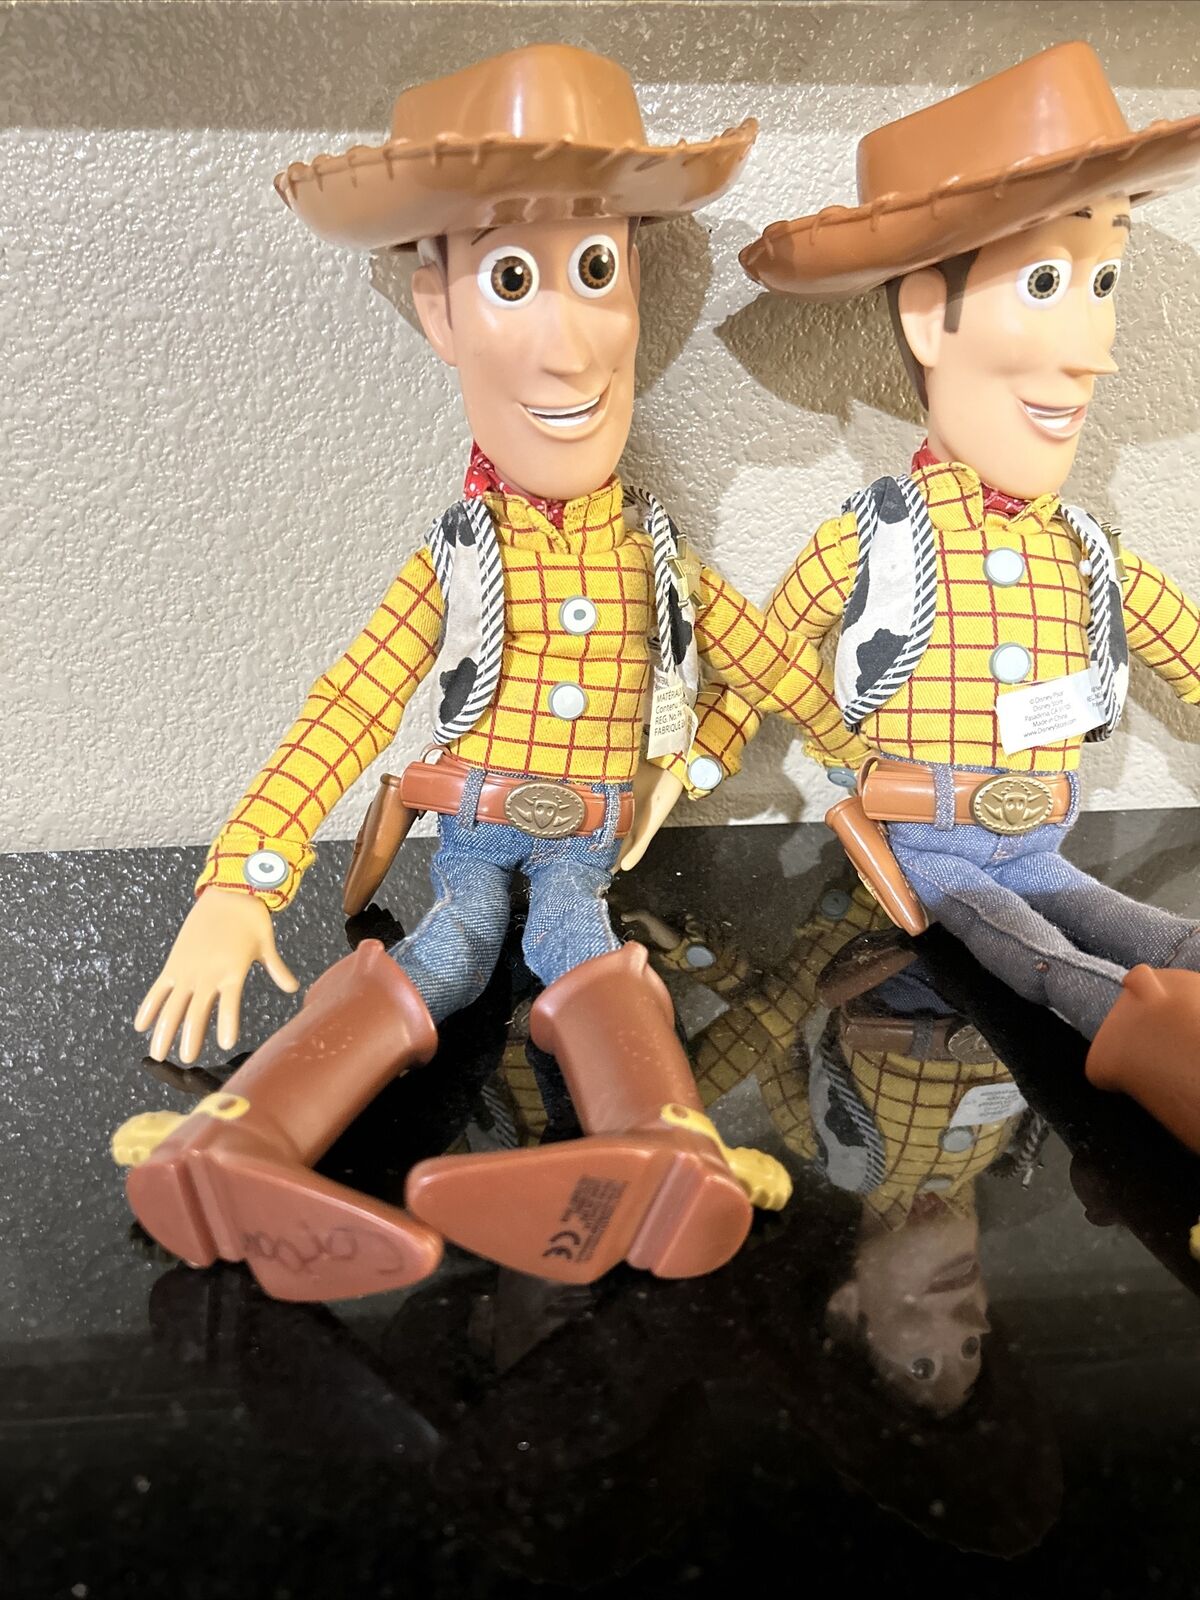 Disney Store Pixar Toy Story 2 Woody Doll Pull String Talking 16" Lot Of 2